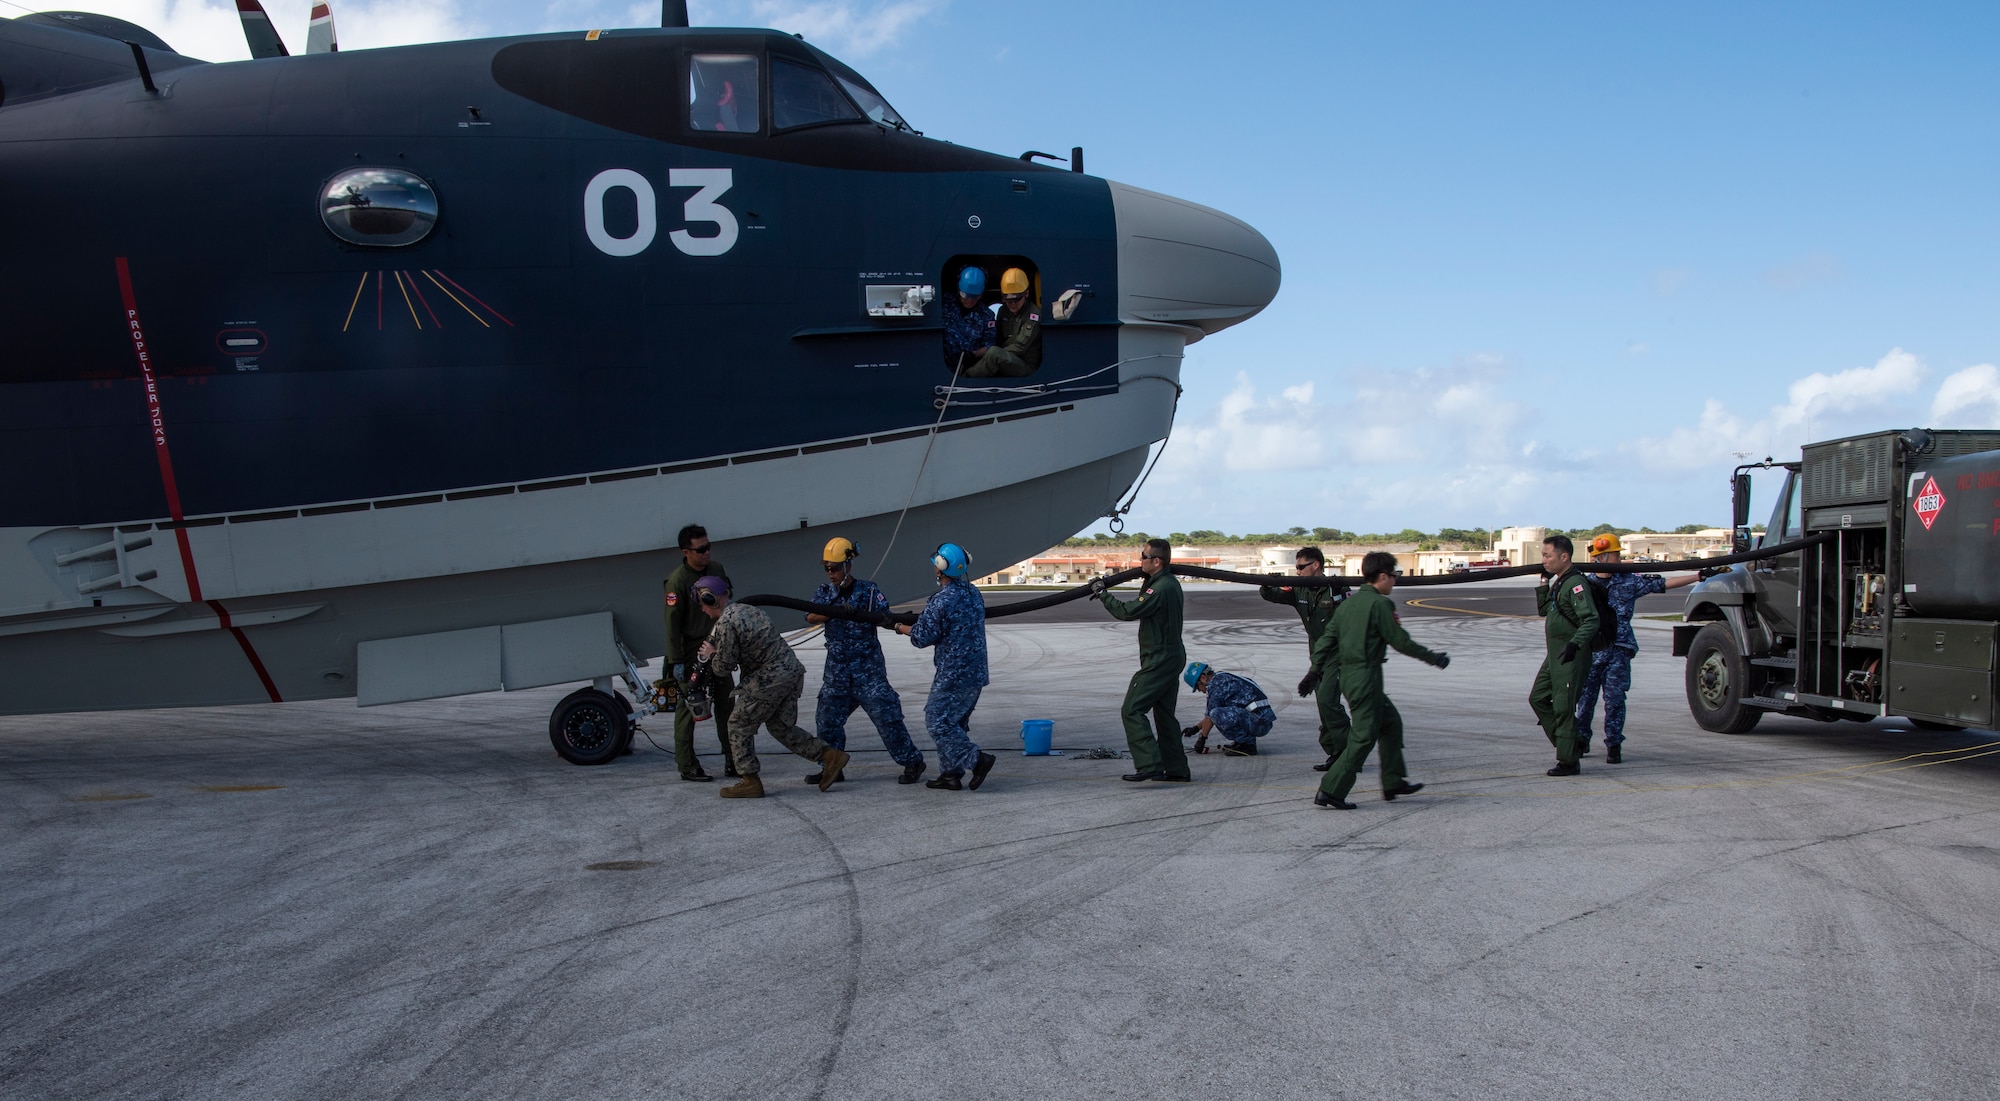 A Koku Jieitai (Japan Air Self Defense Force) US-2 is refueled by U.S. and JASDF service members during Exercise Cope North 20 at Andersen Air Force Base, Guam, Feb. 20, 2020. The 36th Logistics Readiness Squadron Fuels Management Flight won the Pacific Air Forces Best Fuel Flight for 2019, and is one of three bases considered to win the American Petroleum Institute Award, an award given to the best fuels team in the U.S. Air Force. Cope North 20 is an annual trilateral field training exercise conducted at Andersen AFB and around the Commonwealth of the Northern Mariana Islands (CNMI), Palau and Yap in the Federated States of Micronesia. (U.S. Air Force photo by Airman 1st Class Michael S. Murphy)